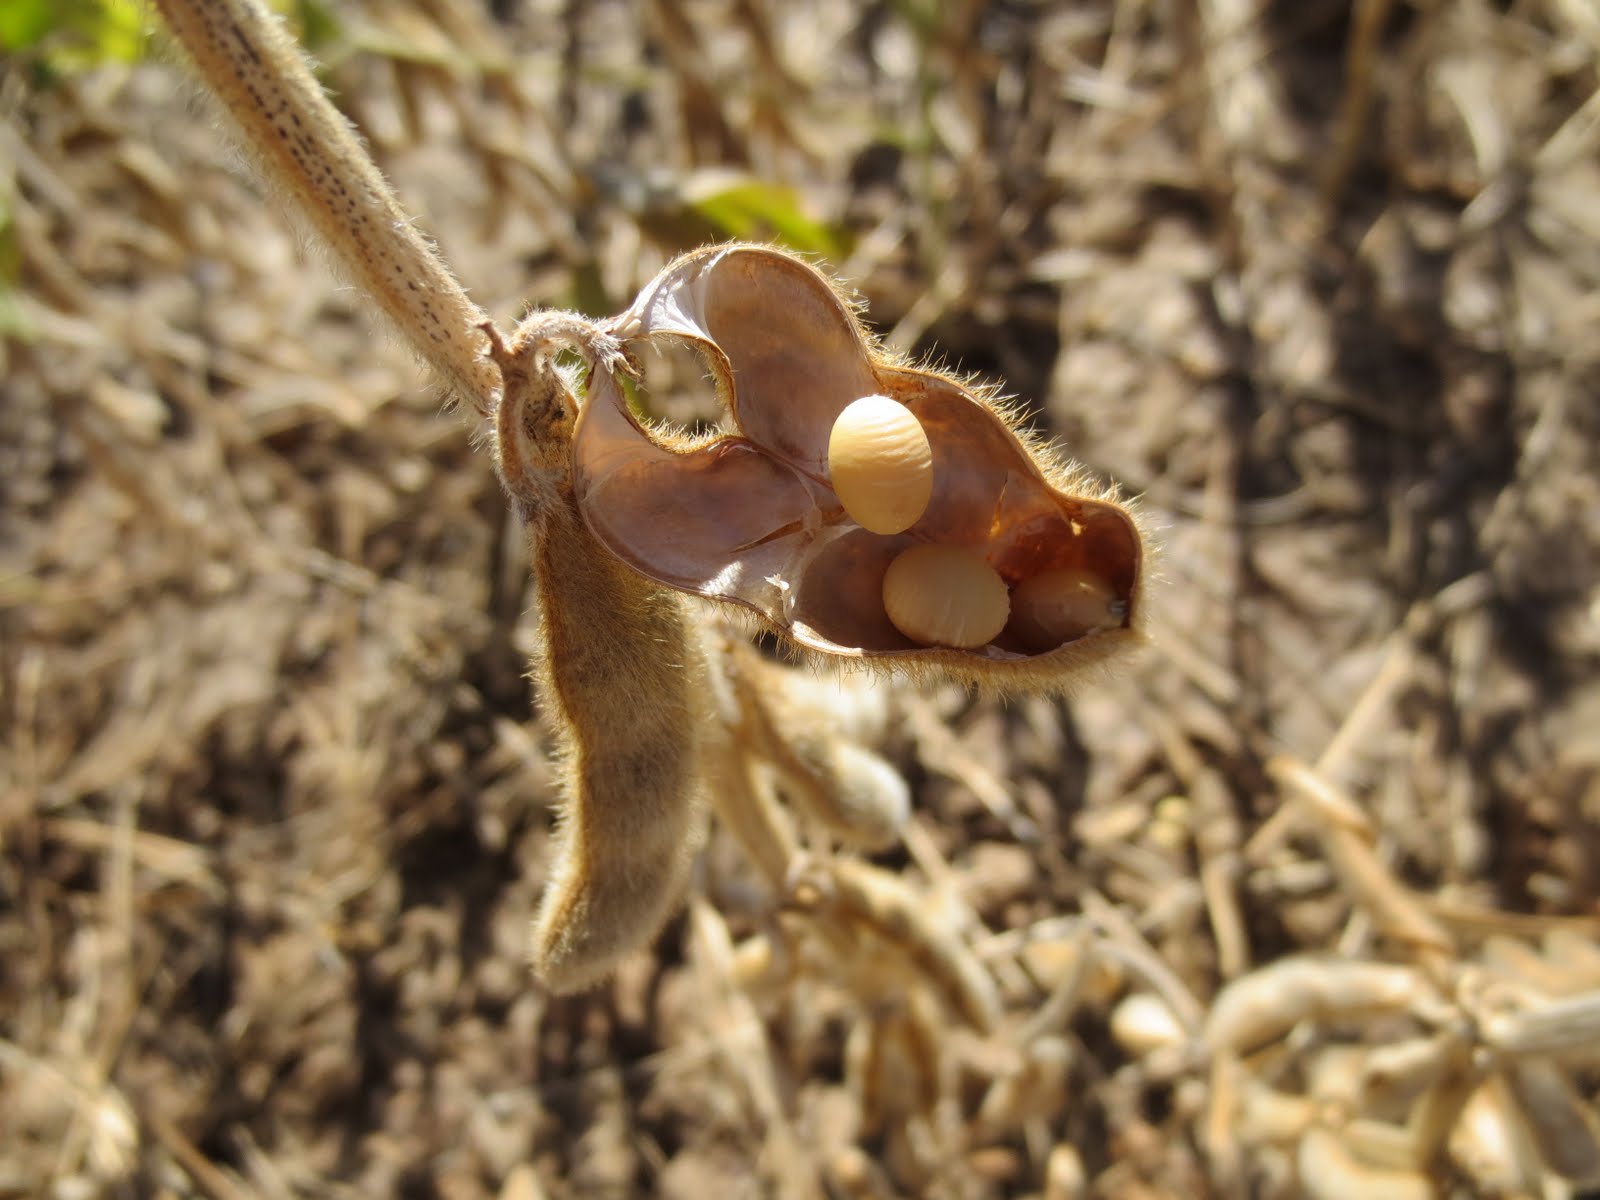 Shattered pre-harvest soybeans